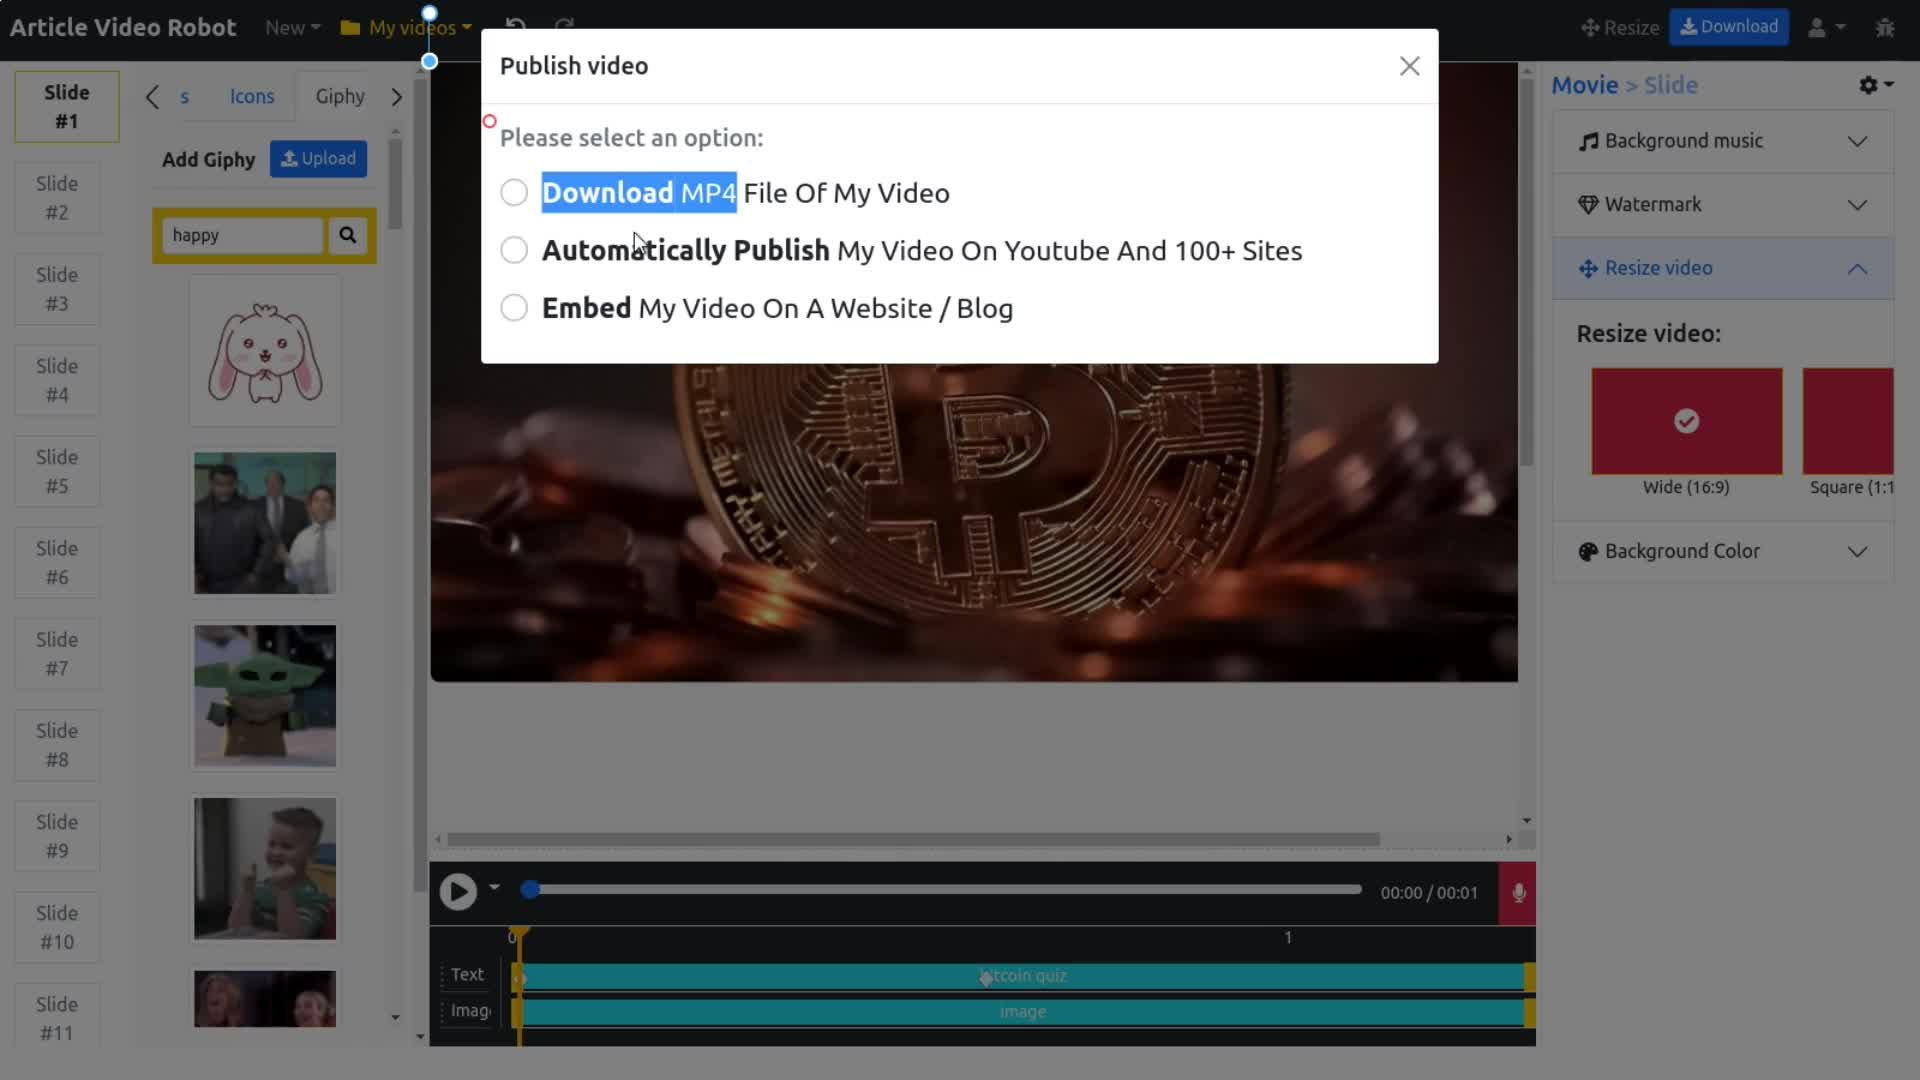 Download 
mp4 file of your video